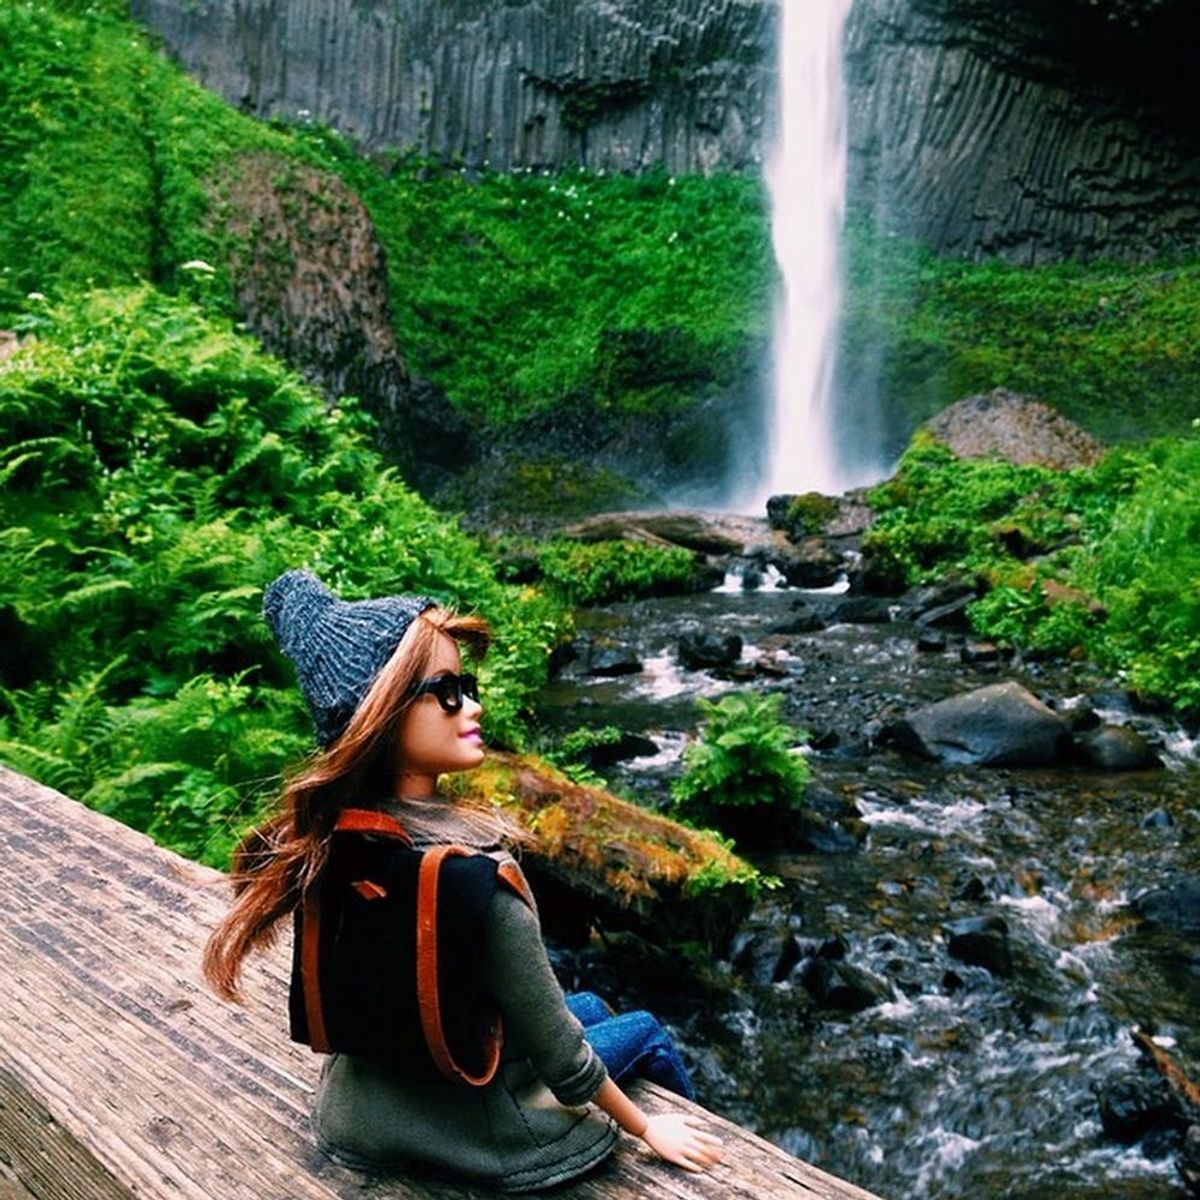 Hipster Barbie’s Instagram Will Give You a Serious Case of FOMO